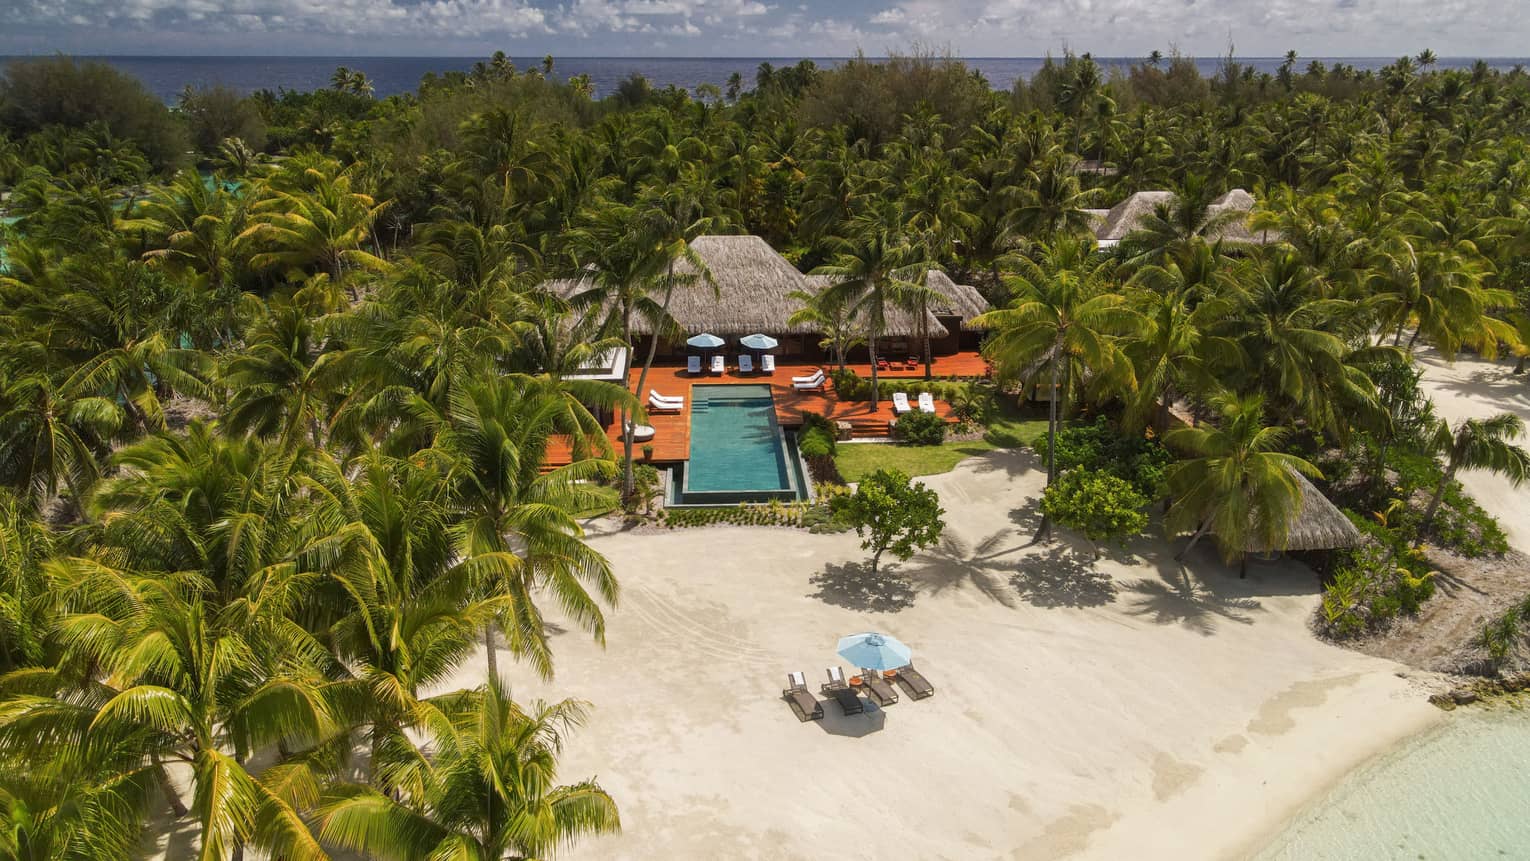 Aerial view of Bora Bora villa with pool on edge of beach, surrounded by palm trees